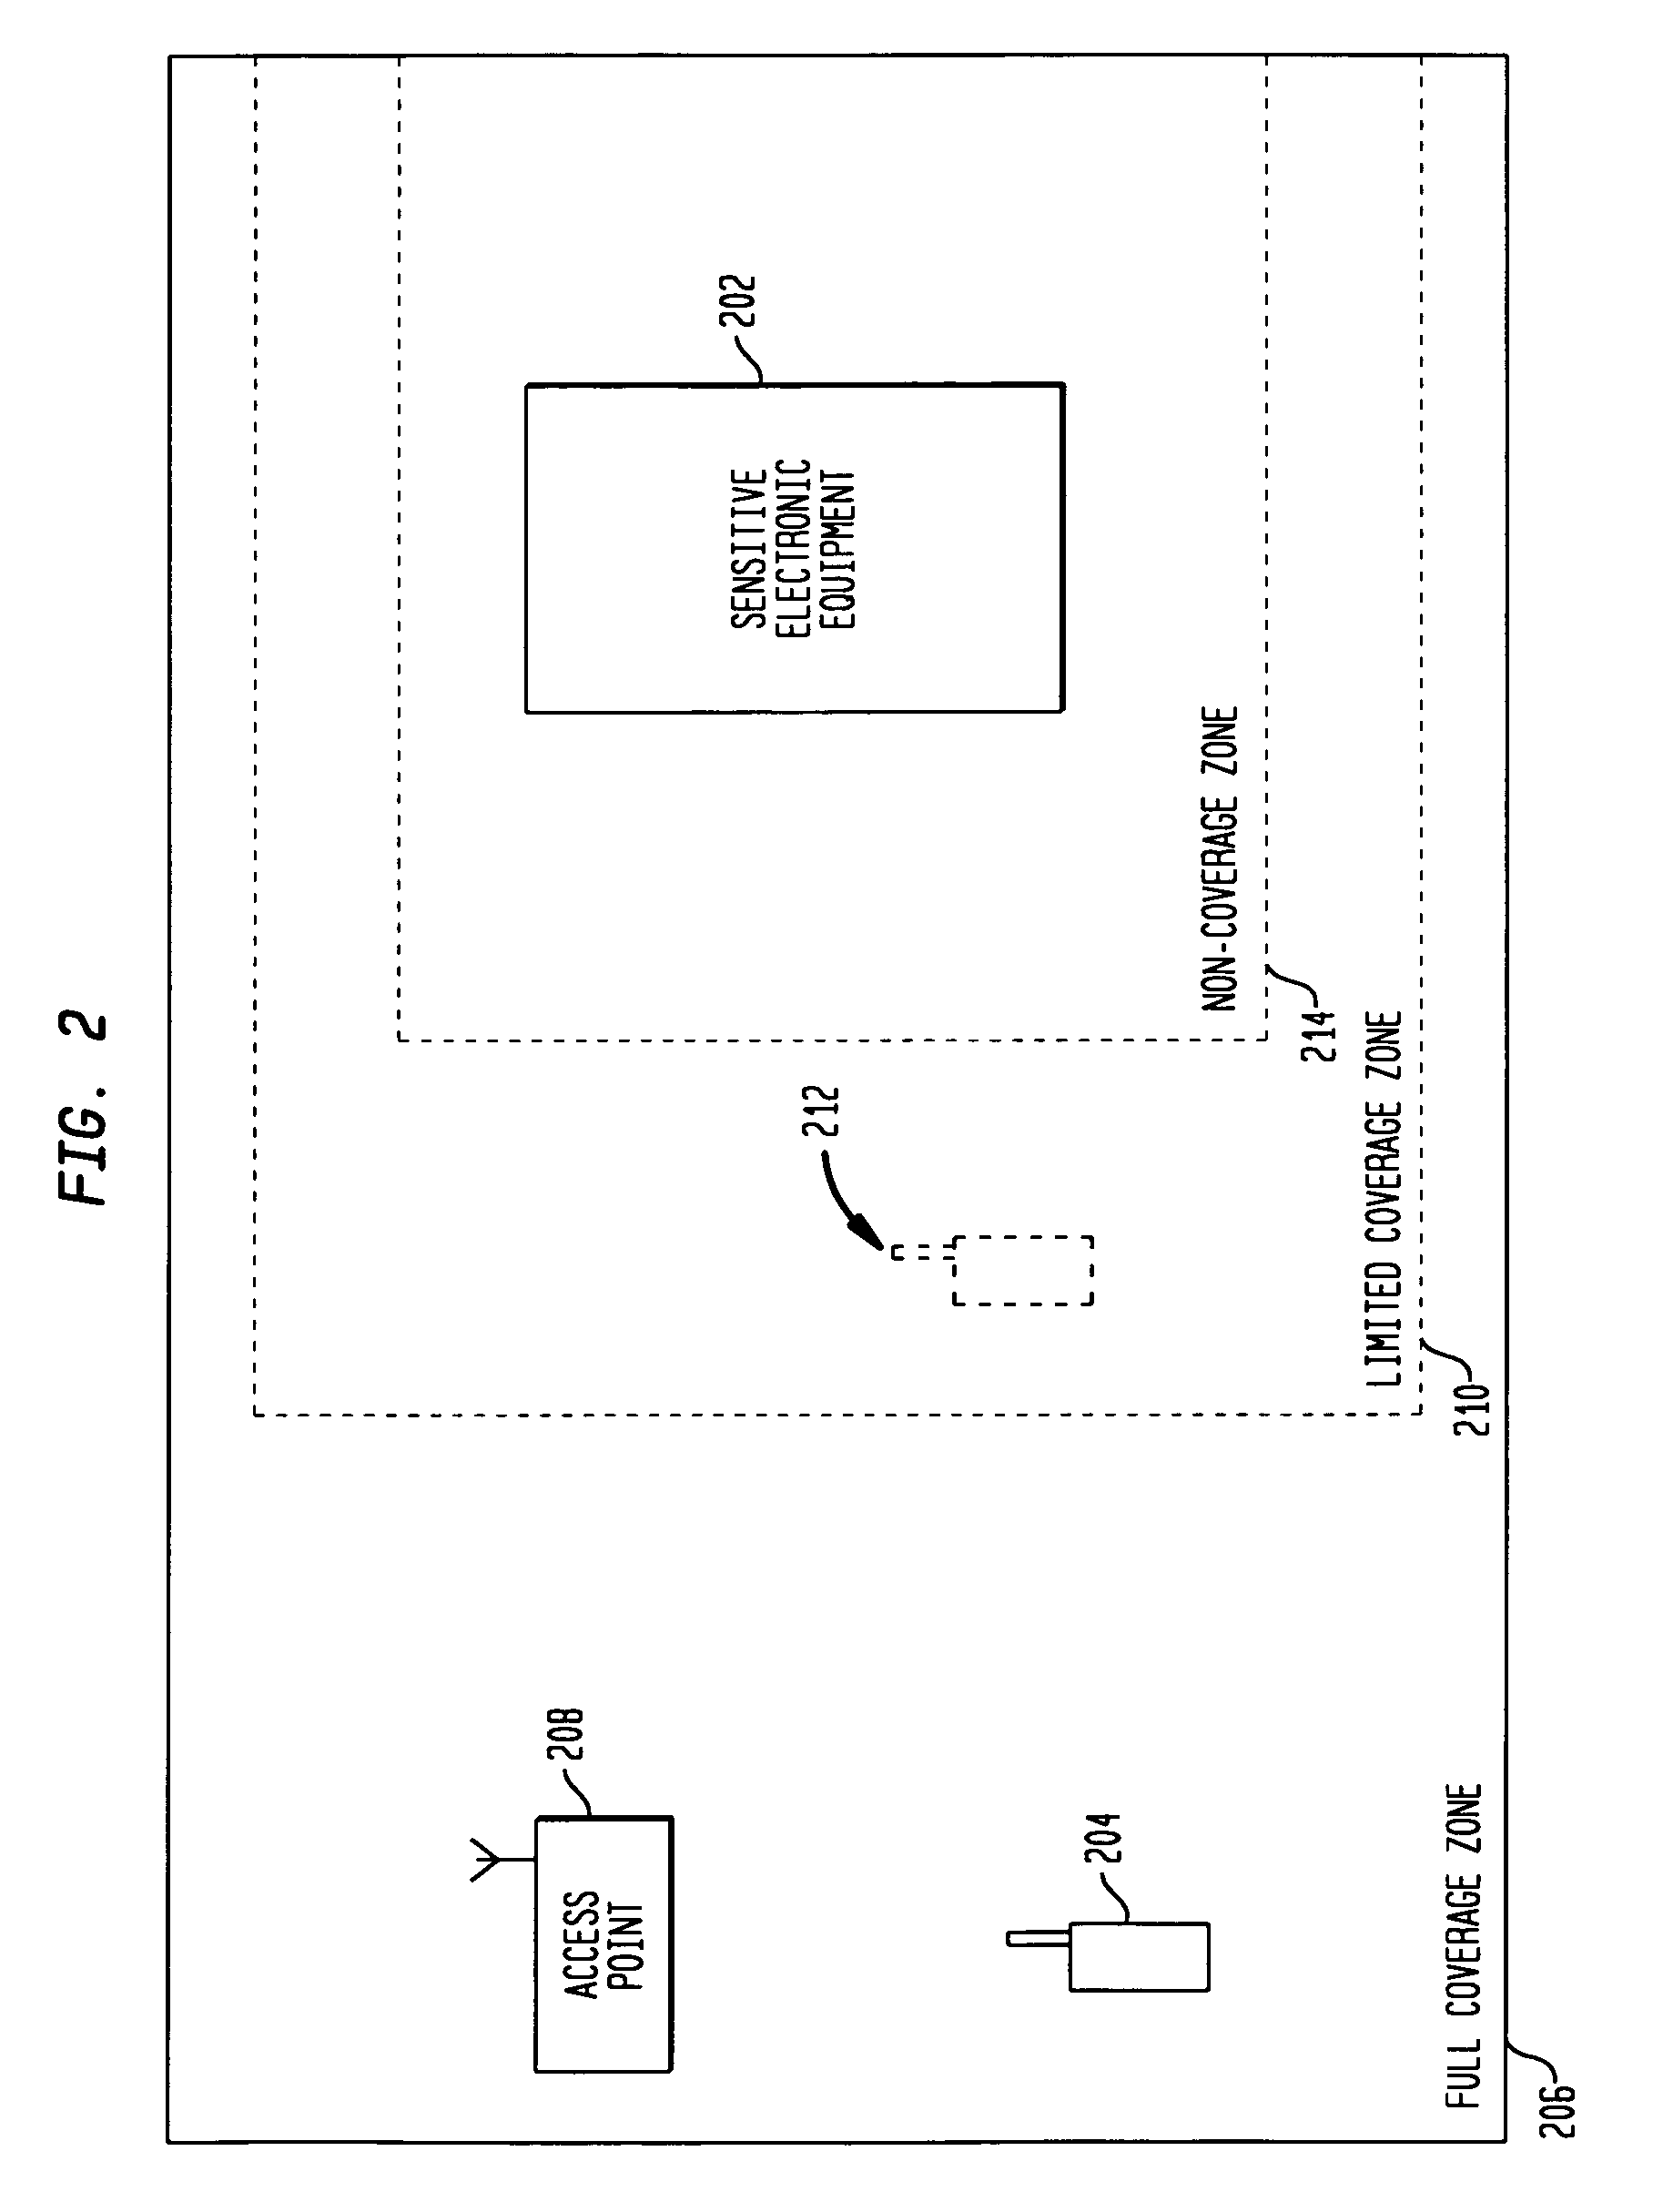 Method and apparatus for reducing interference associated with wireless communication